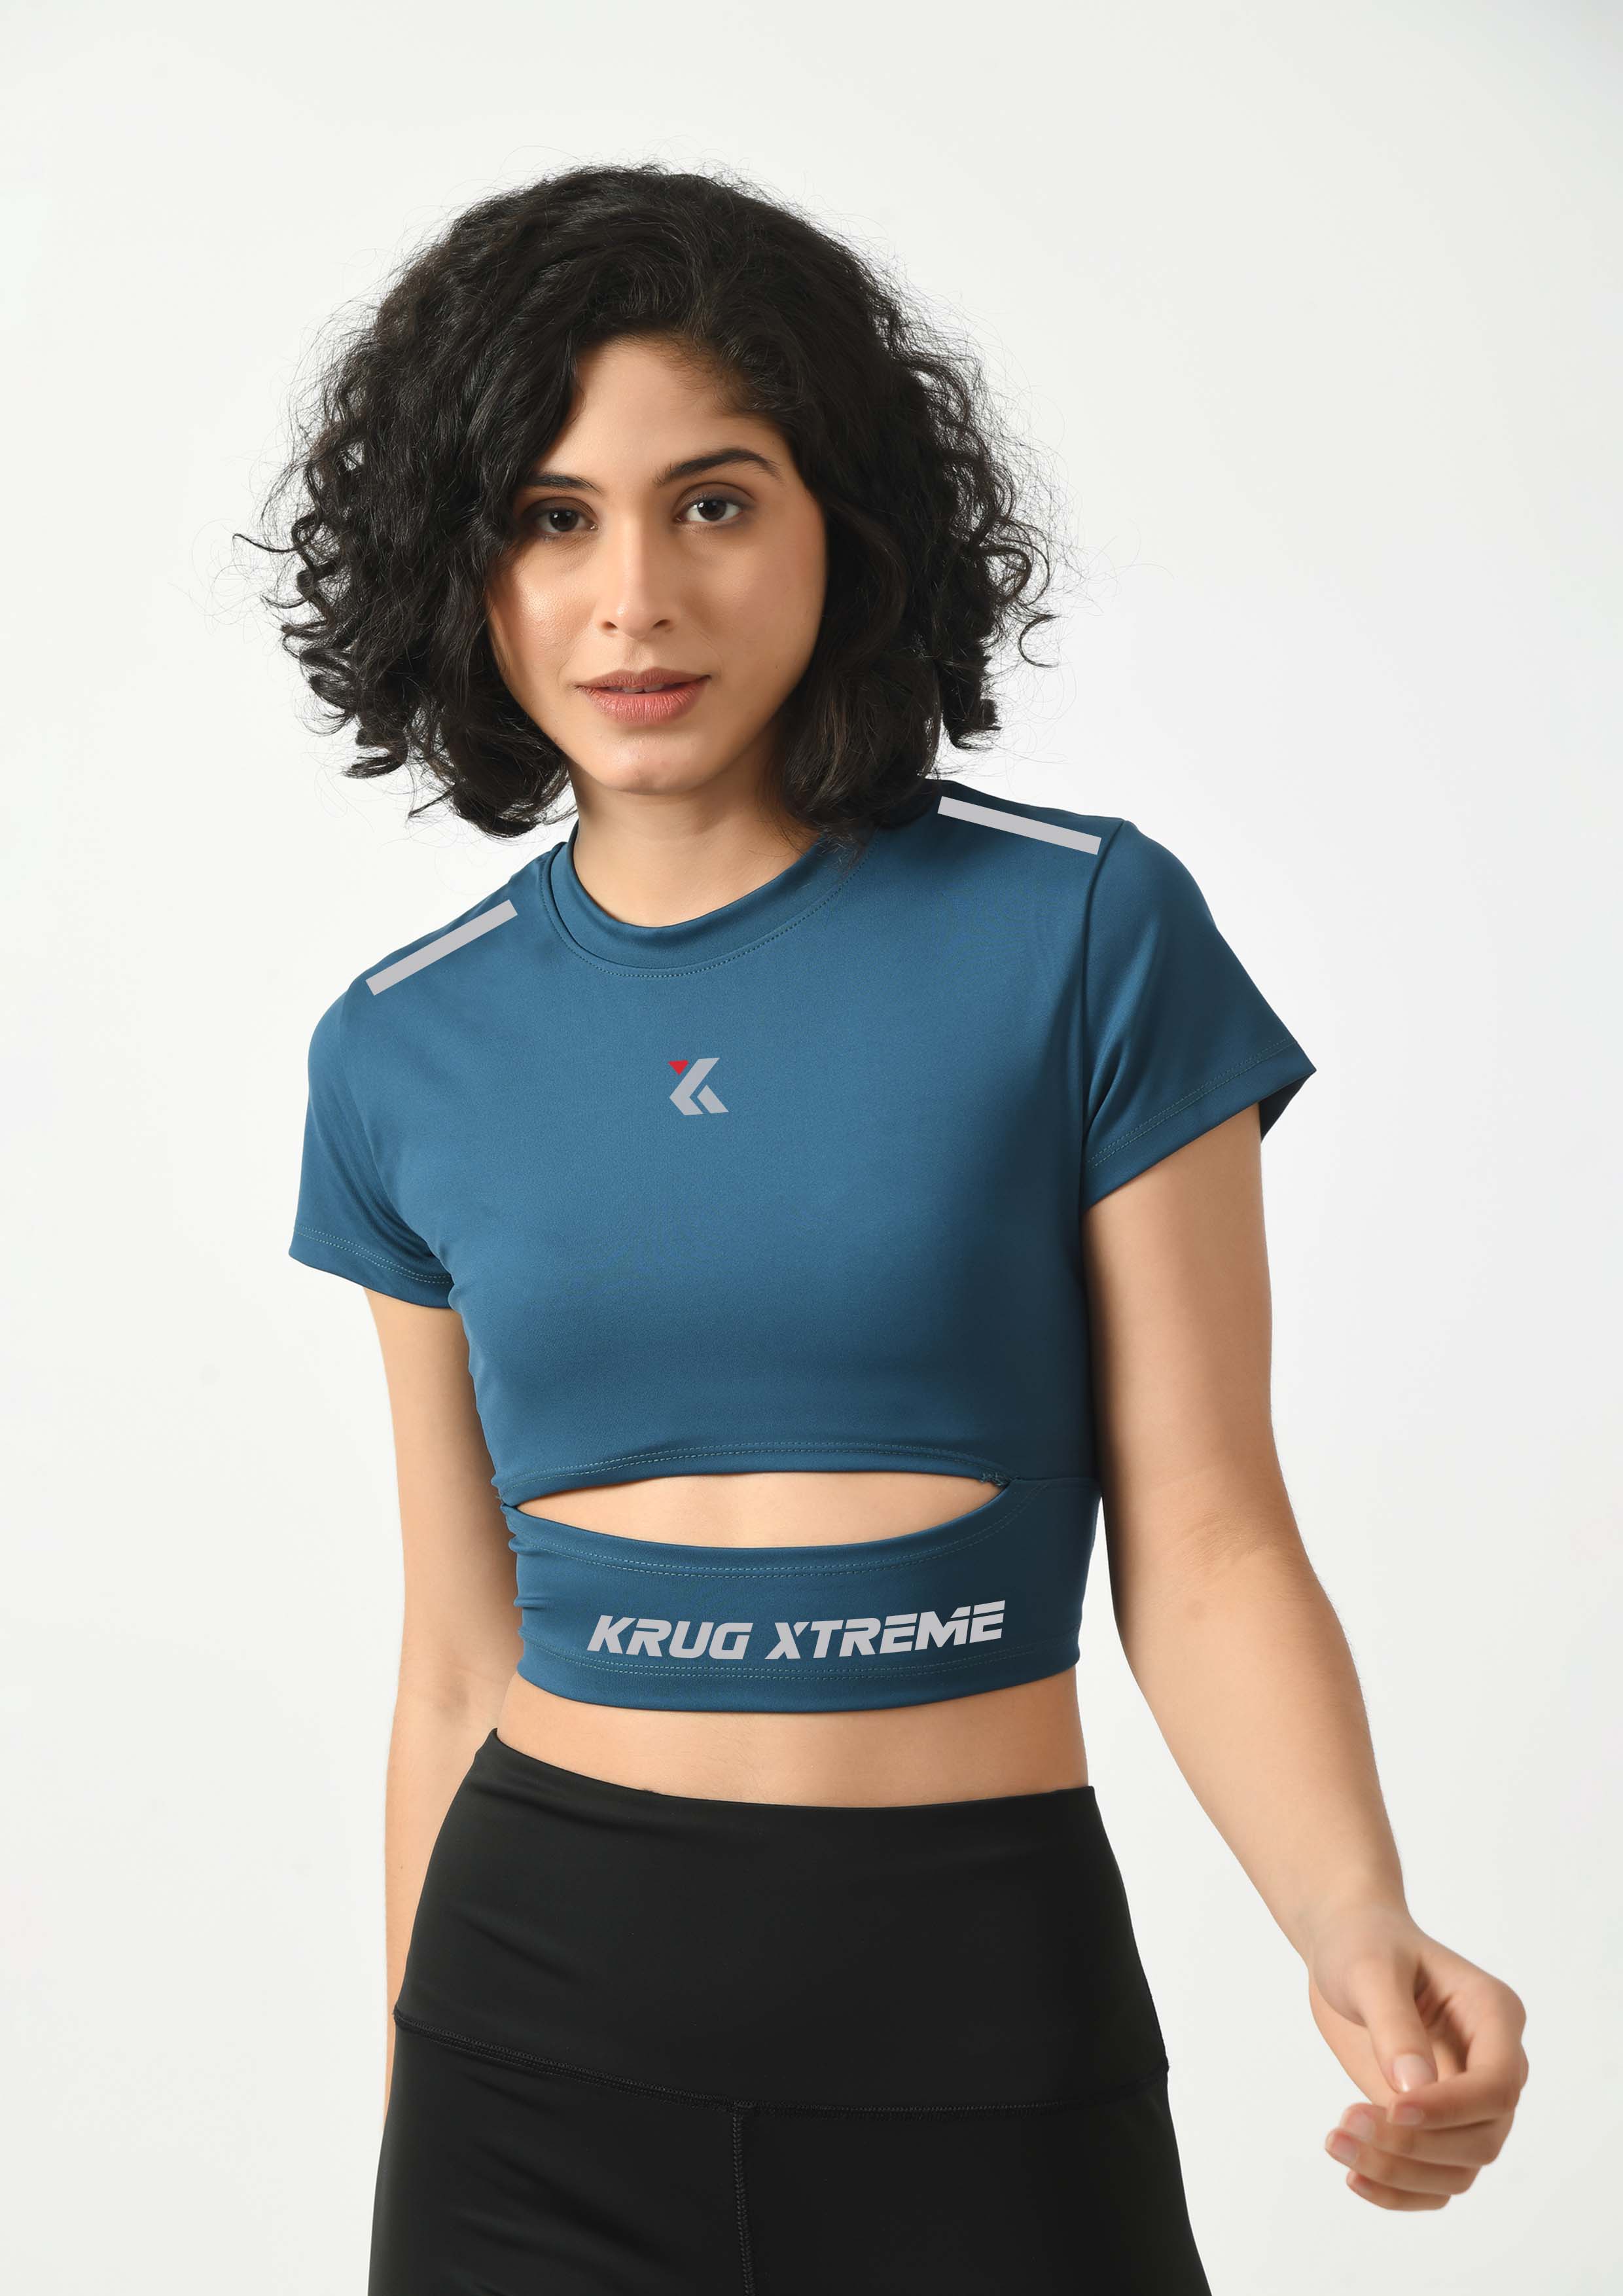 Sapphire Blue Gym Top for Women